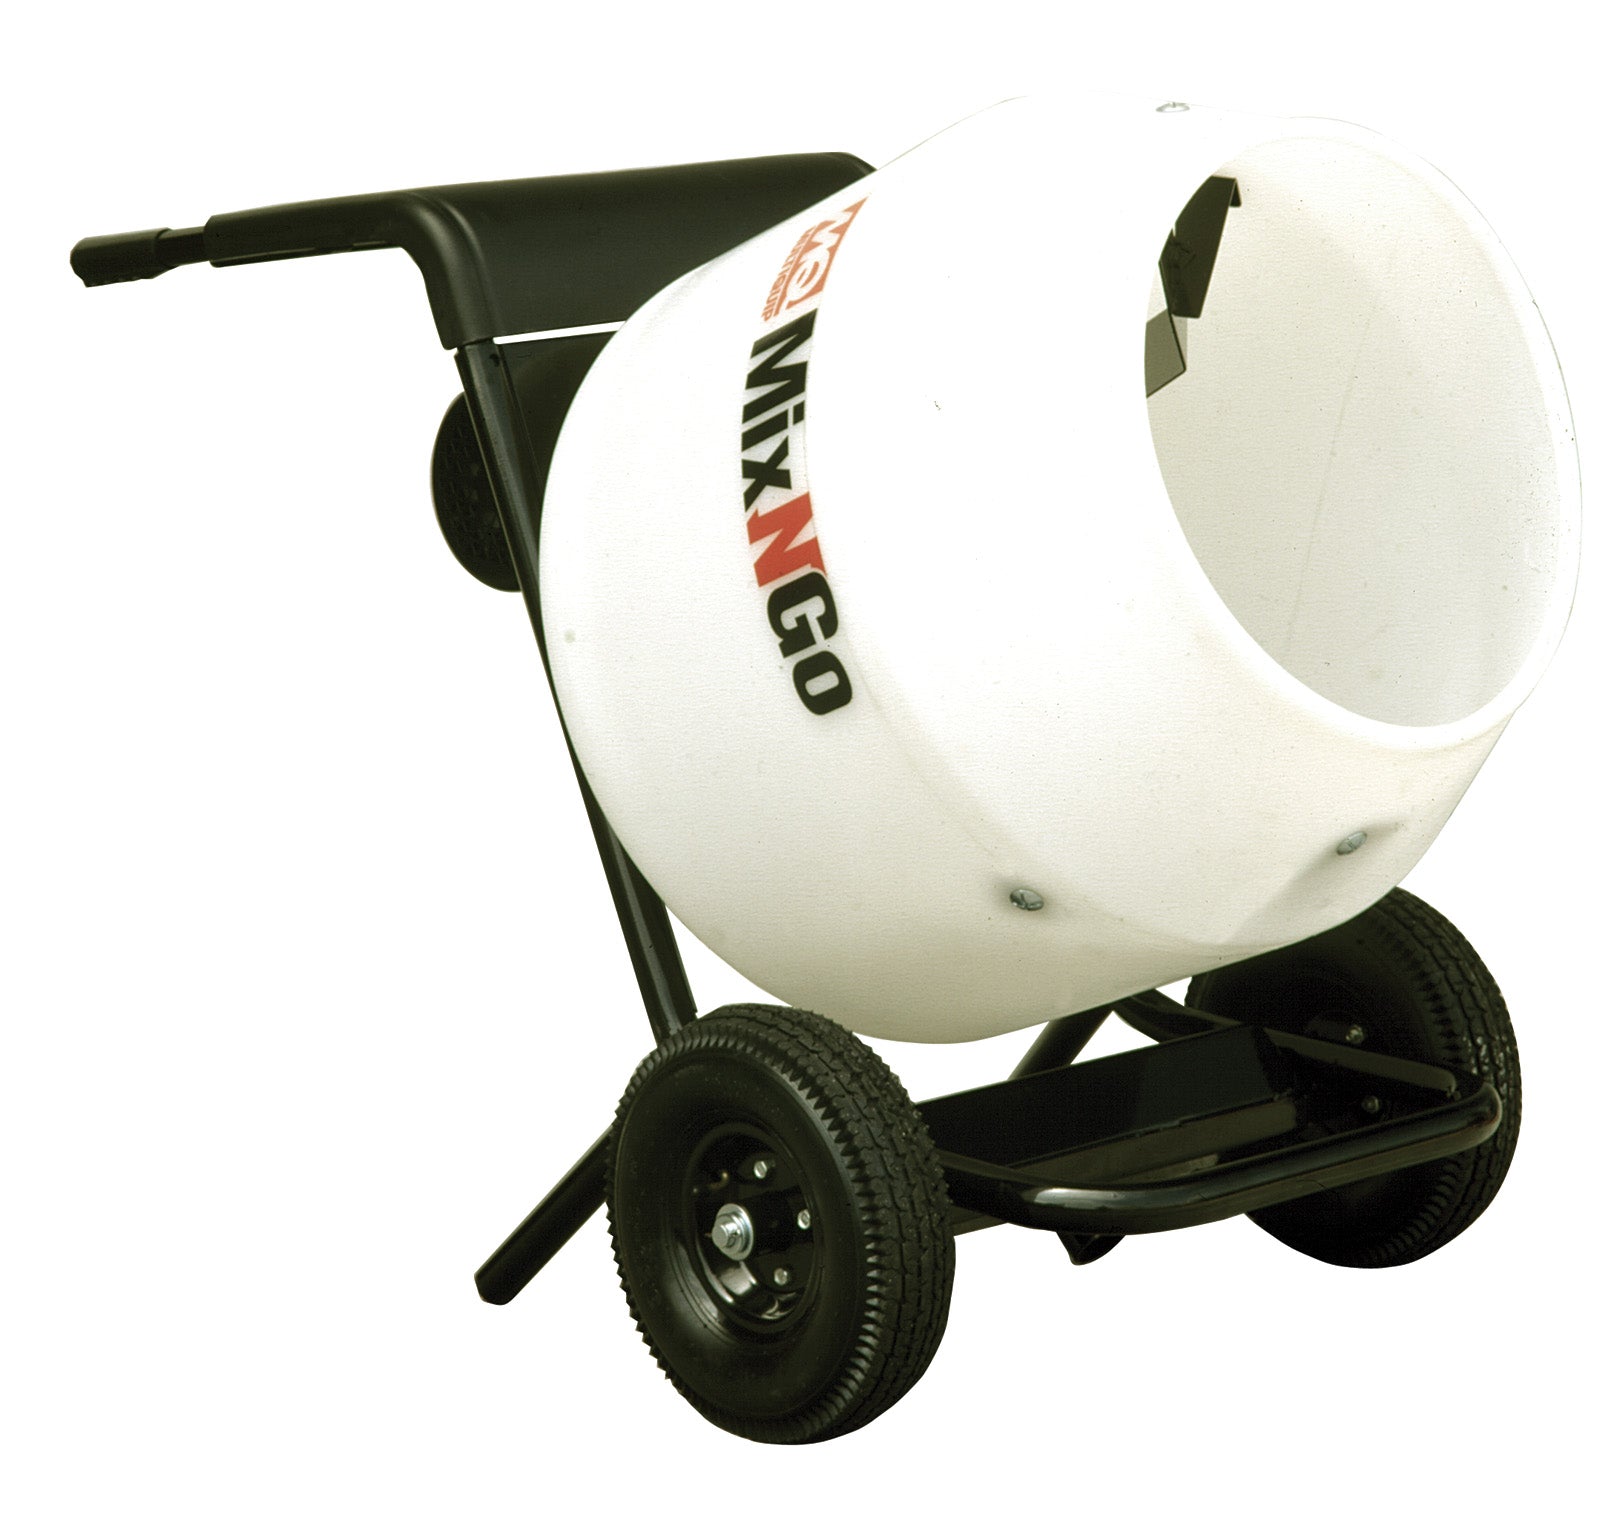 Multiquip MC3PEA Mix-N-Go Electric Concrete Mixer with Stand and Wheels